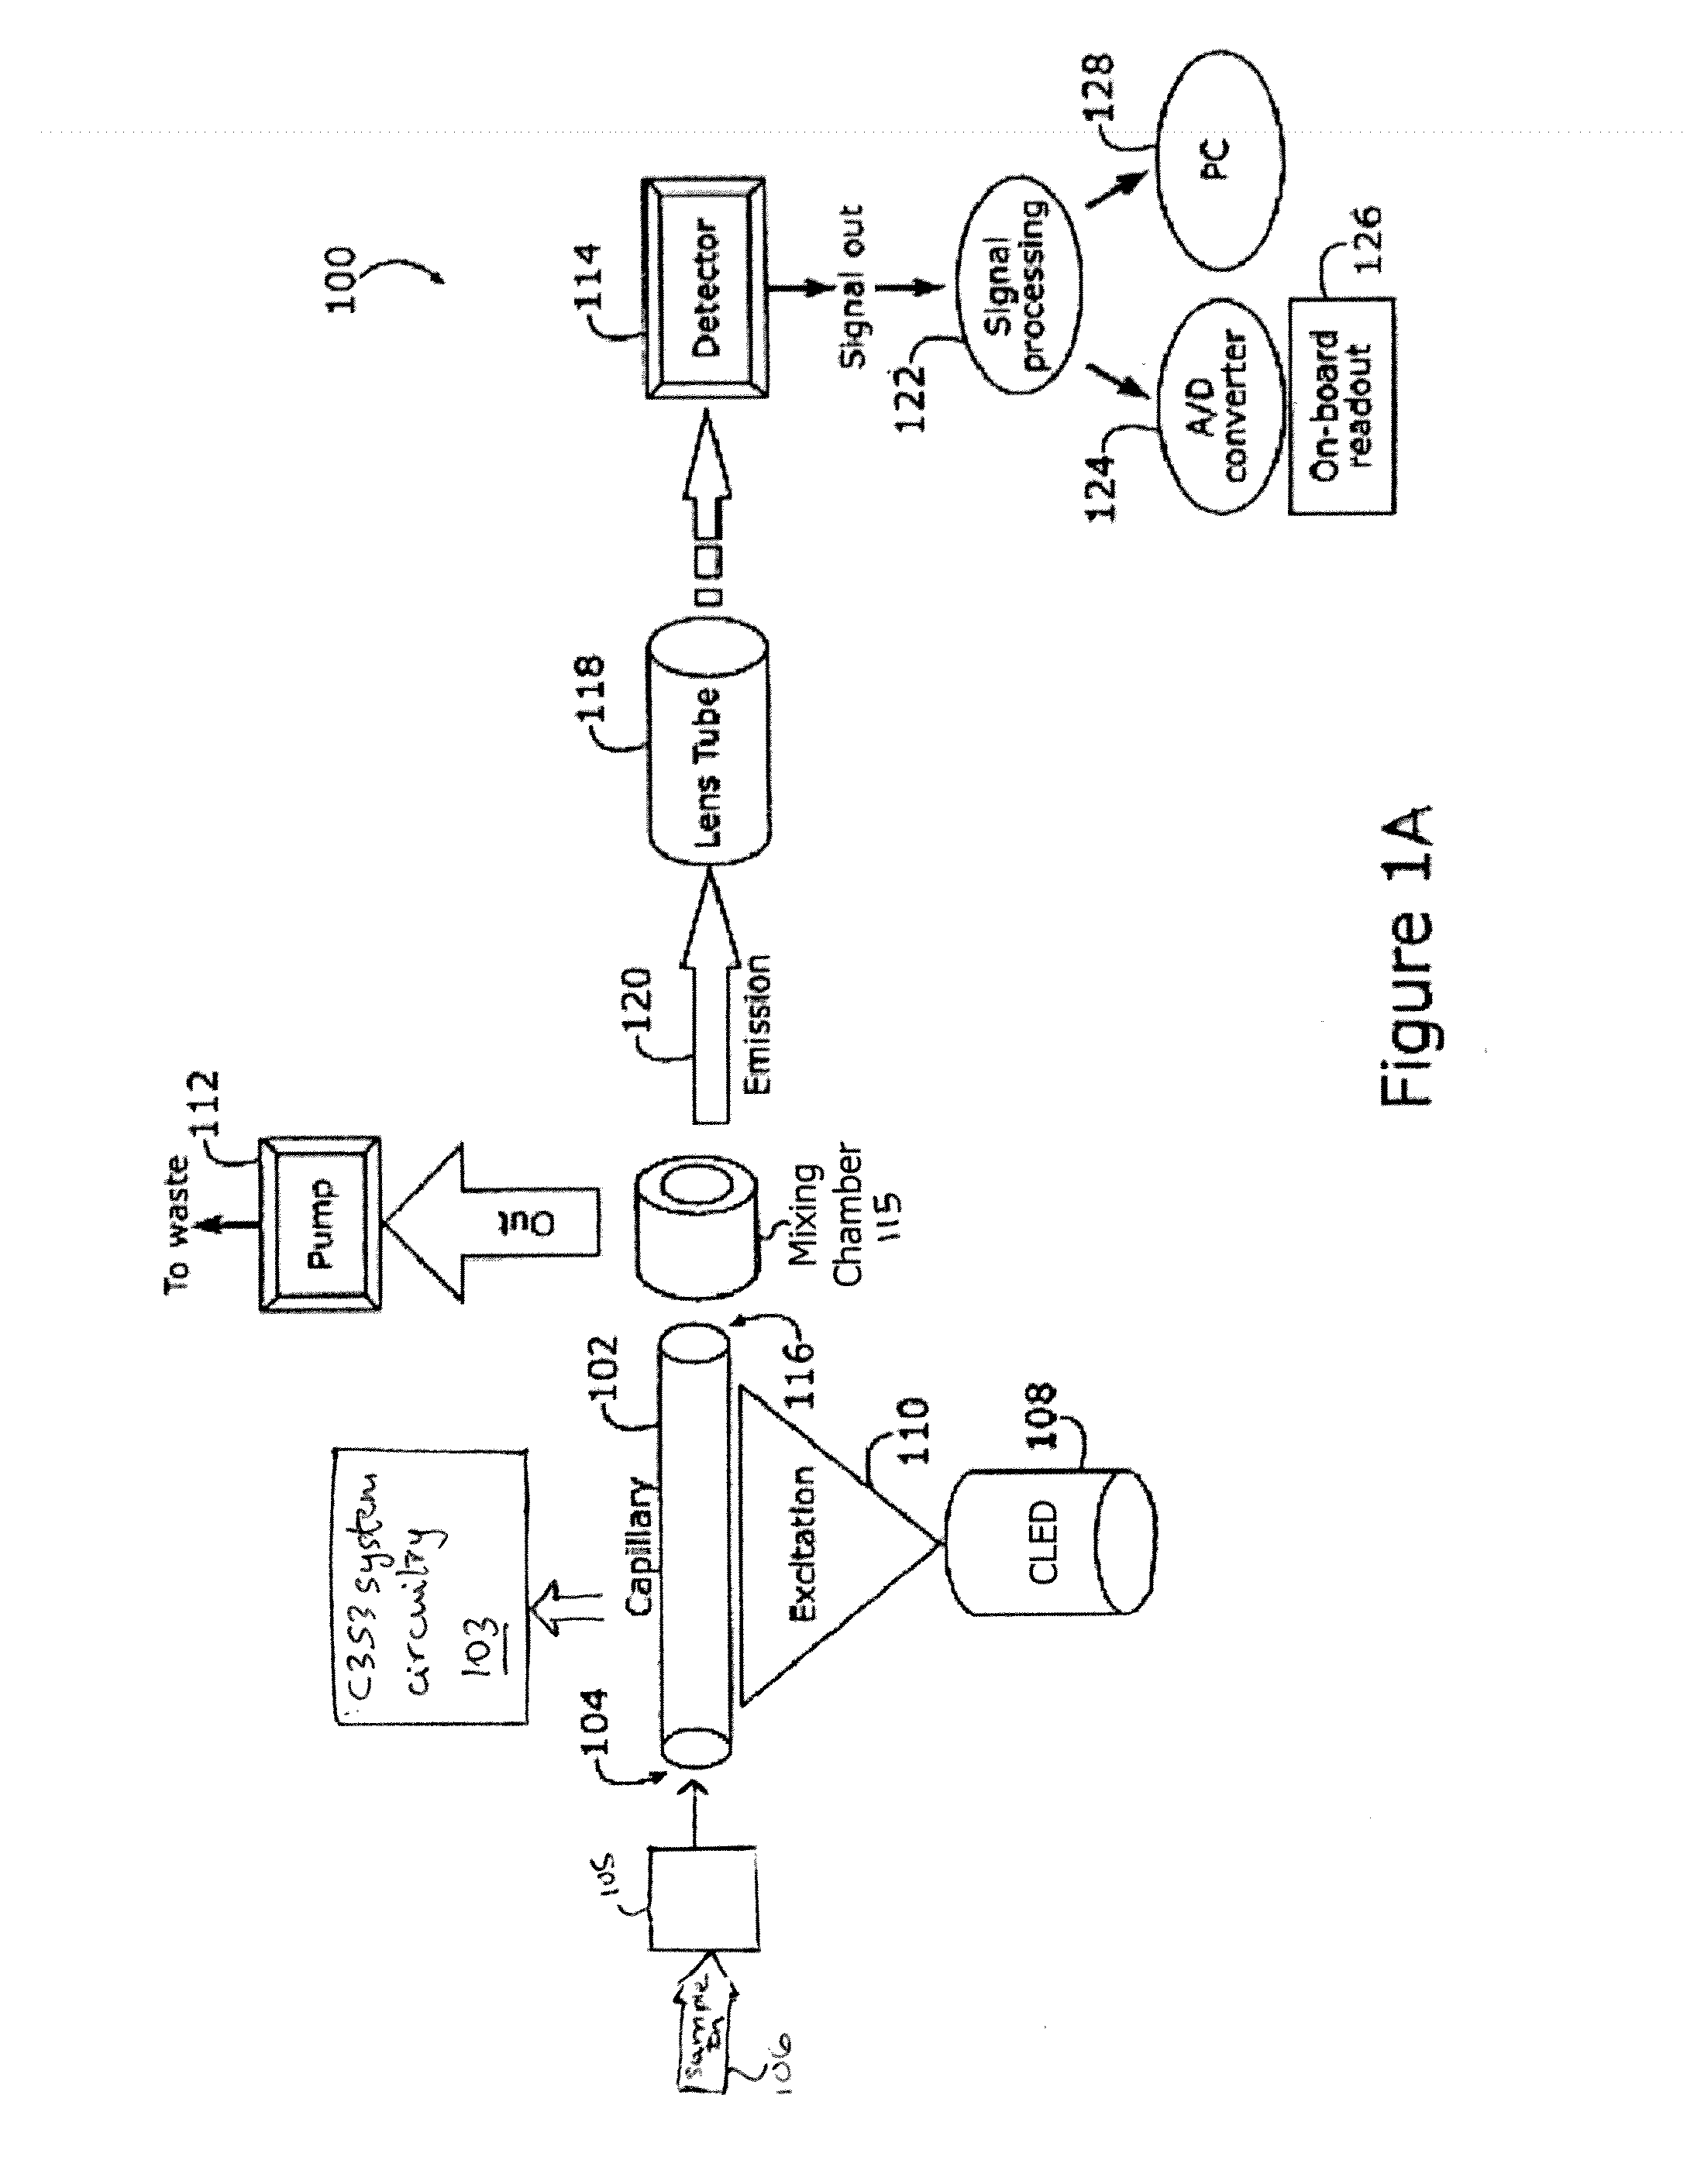 Capillary biosensor system and its method of use